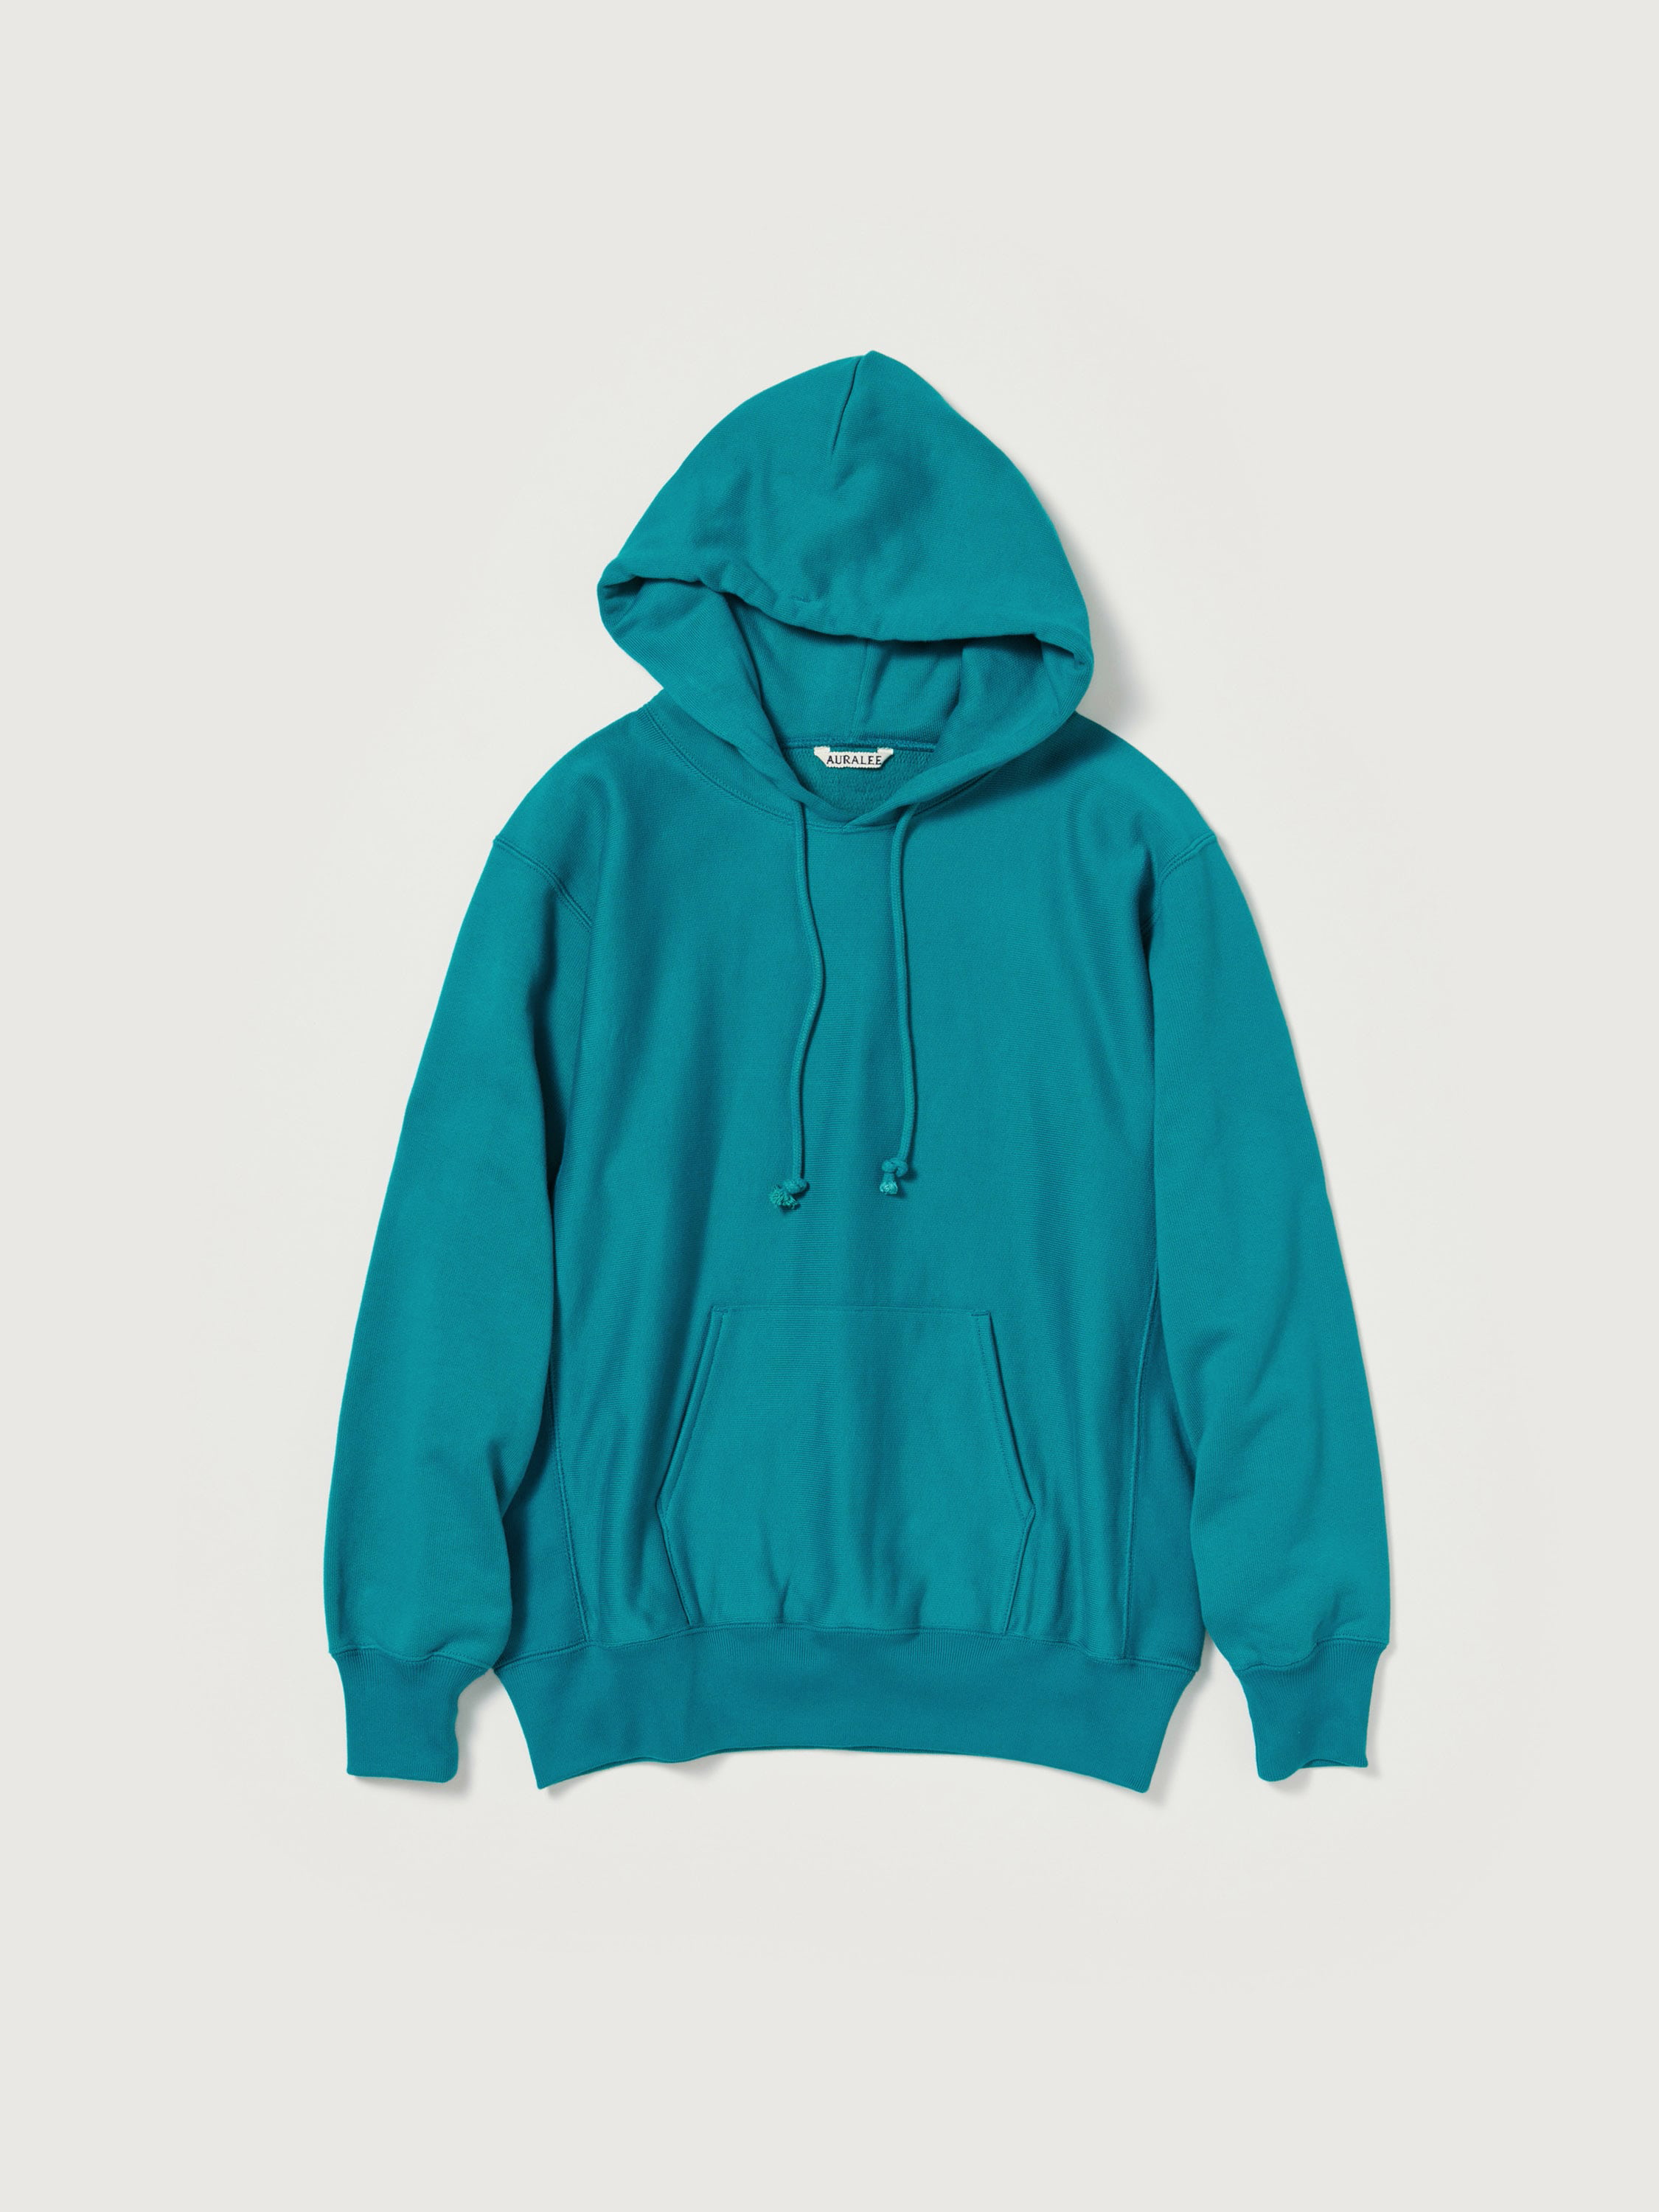 HIGH COUNT HEAVY SWEAT P/O PARKA 詳細画像 TEAL GREEN 4